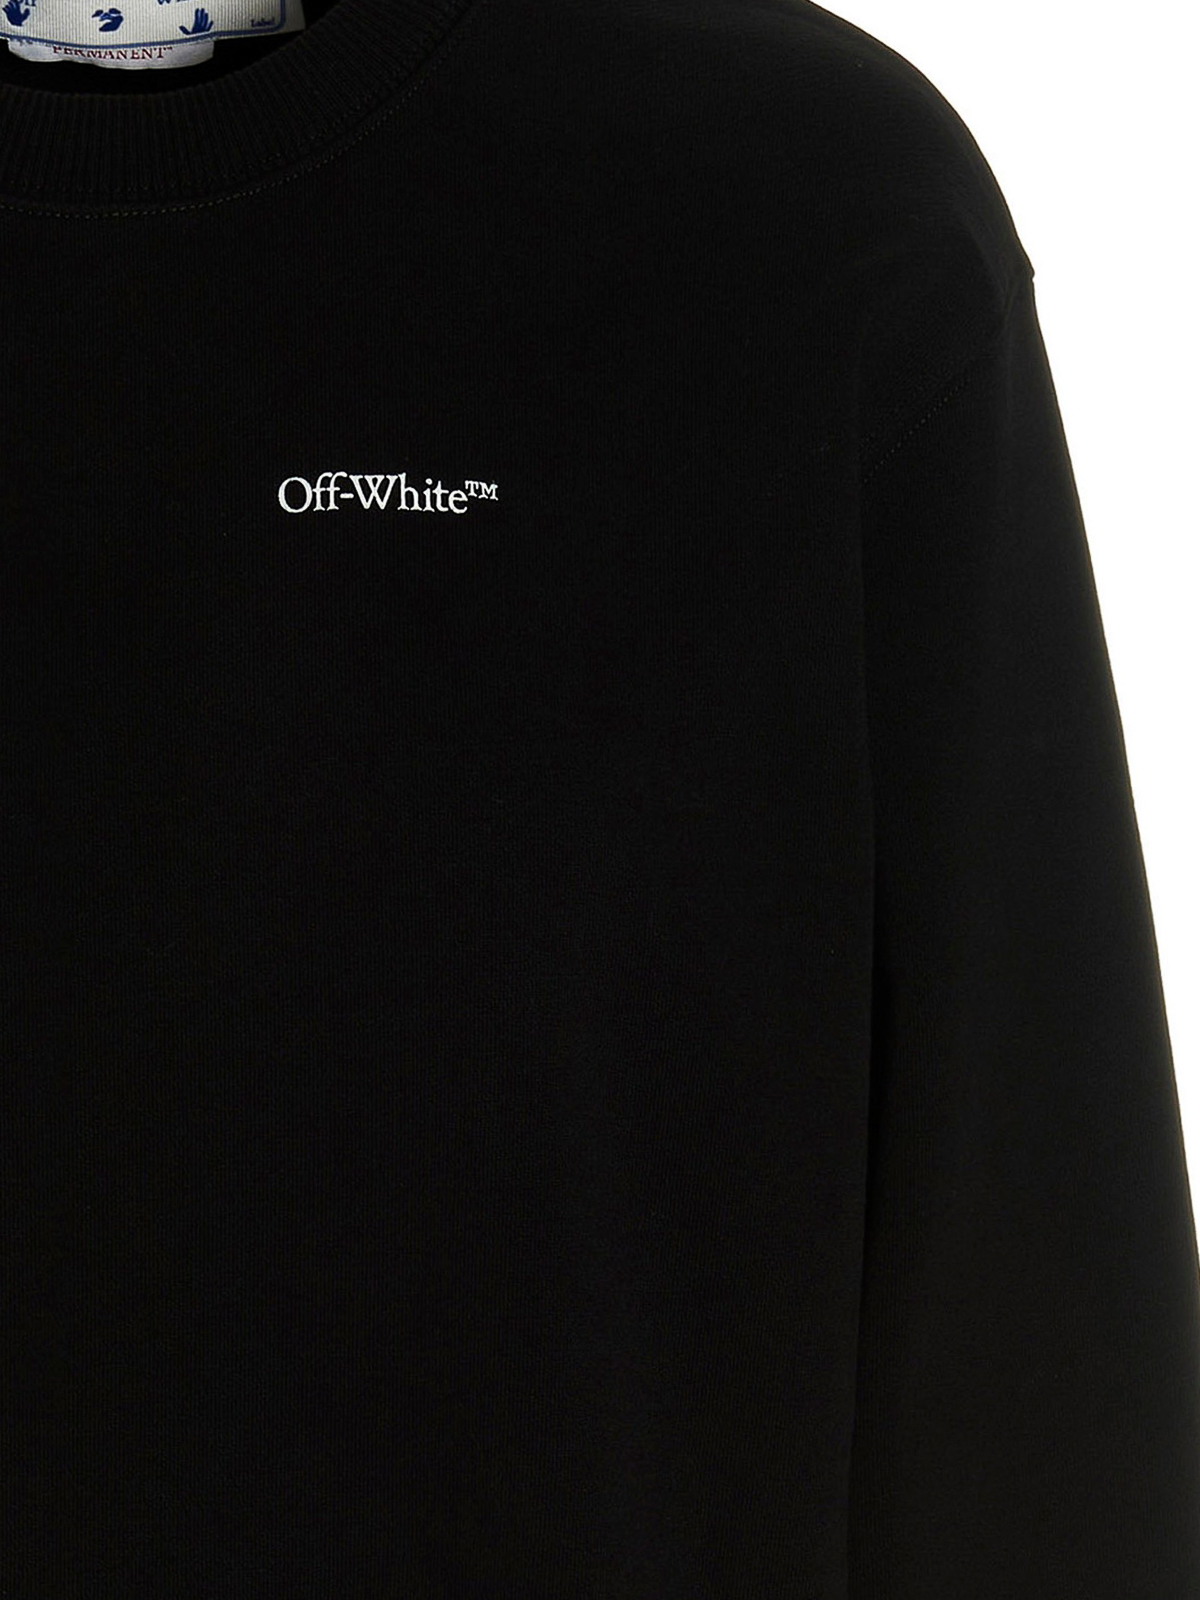 Off-White Sweathirts & Pullovers for Men